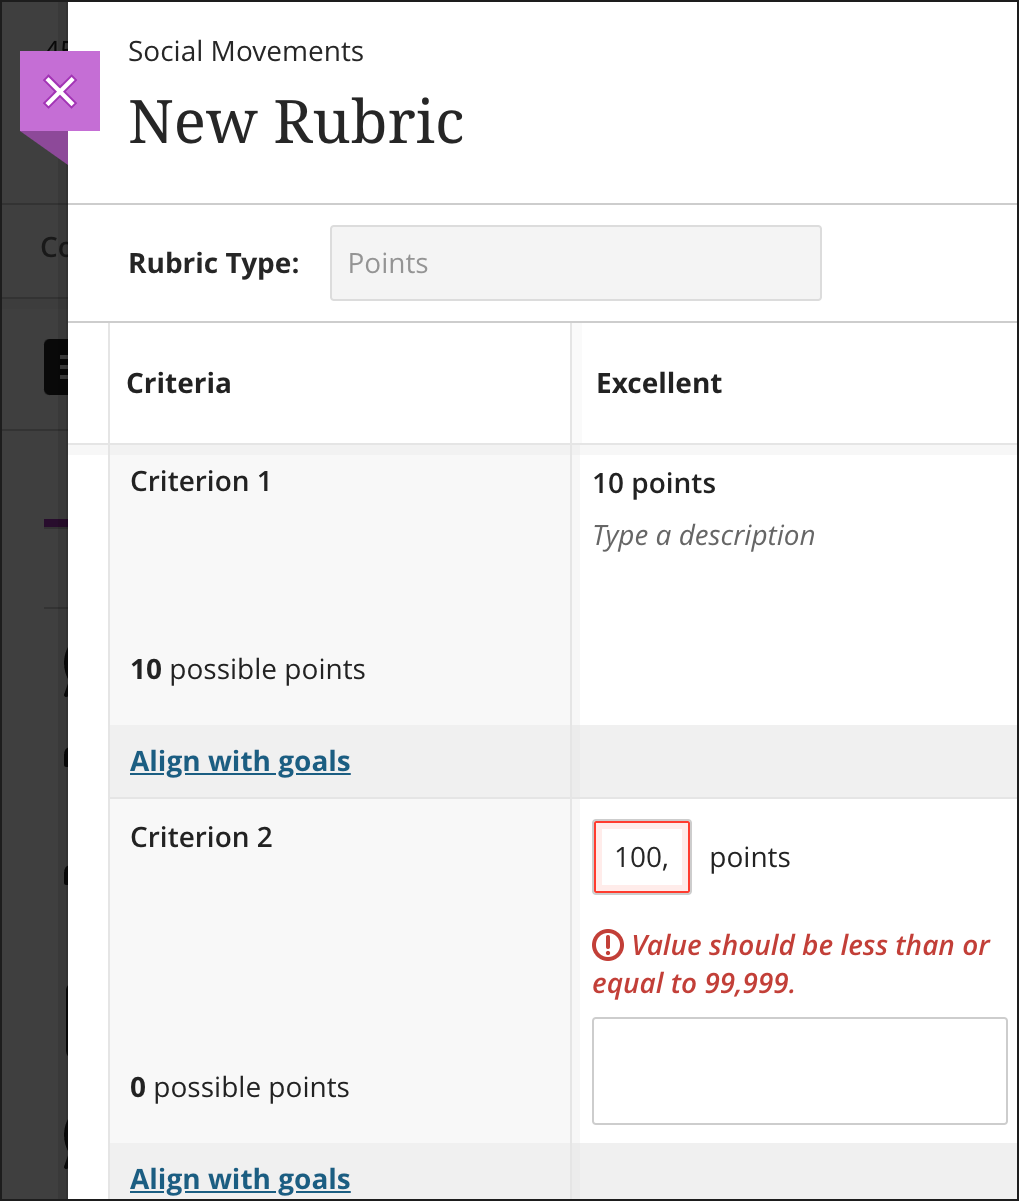 This is how a point-based new rubric looks like. There’s a warning sign: added value should be less than or equal to 99,999.